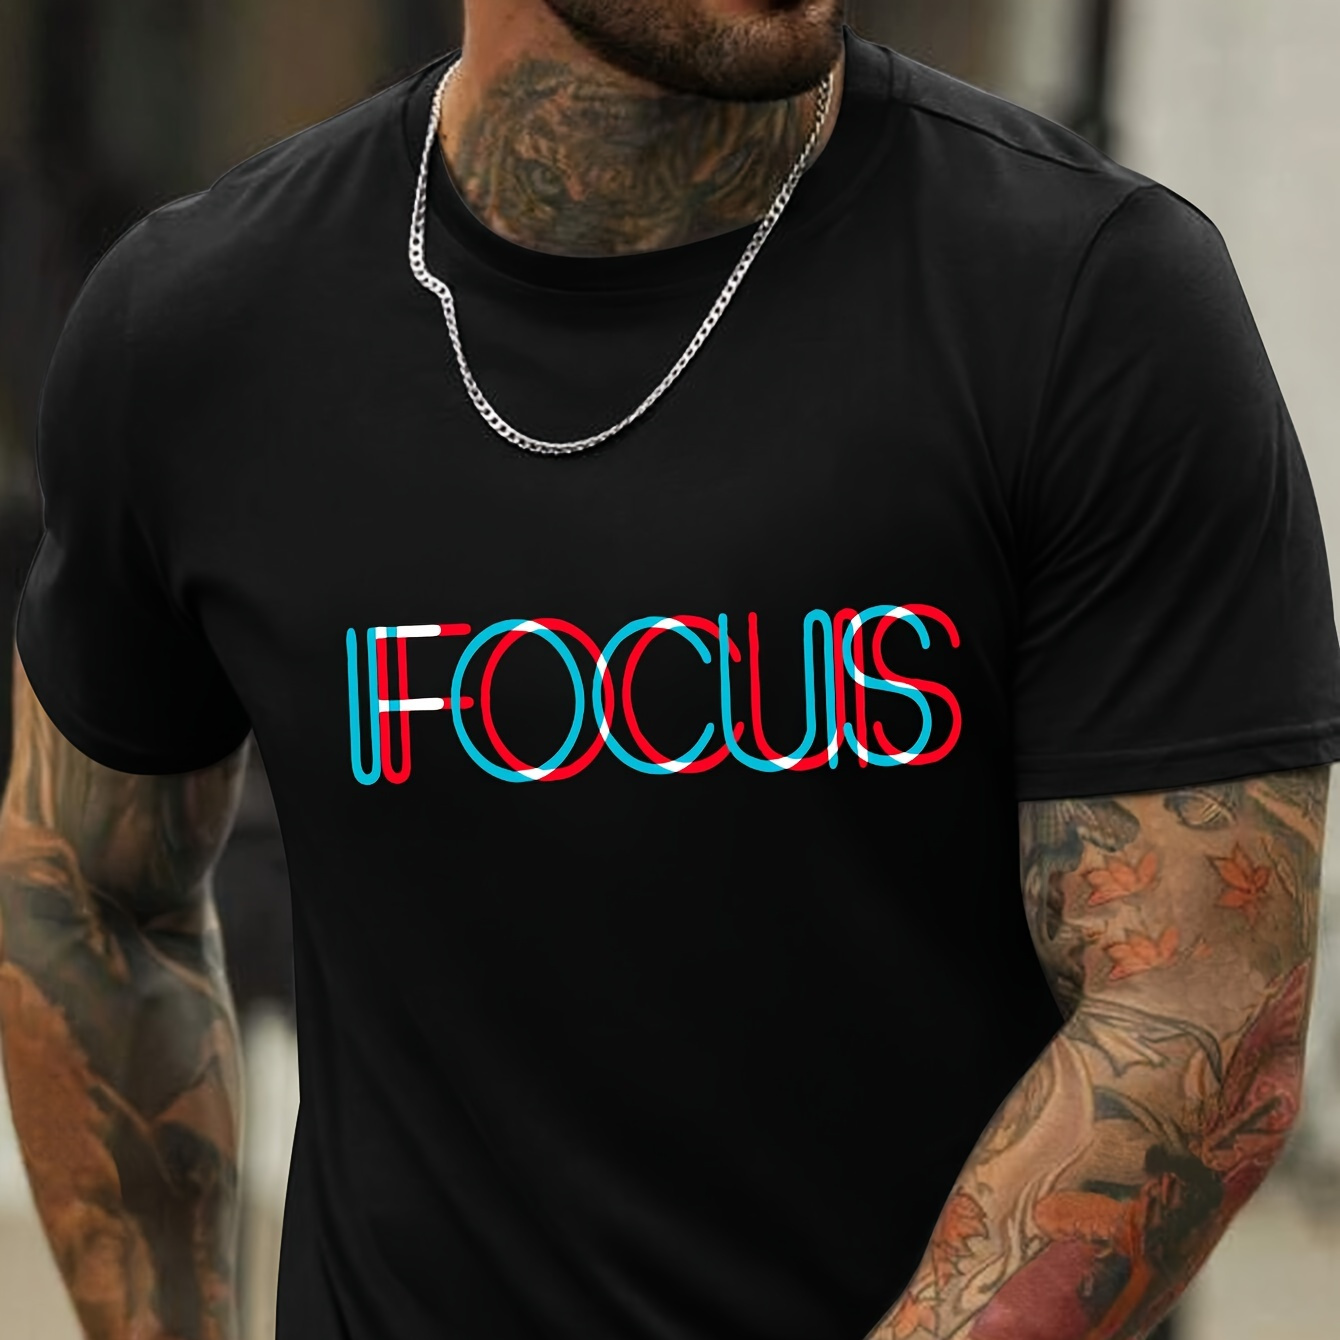 

Focus "stylish Print Summer & Spring Tee For Men, Casual Short Sleeve Fashion Style T-shirt, Sporty New Arrival Novelty Top For Leisure